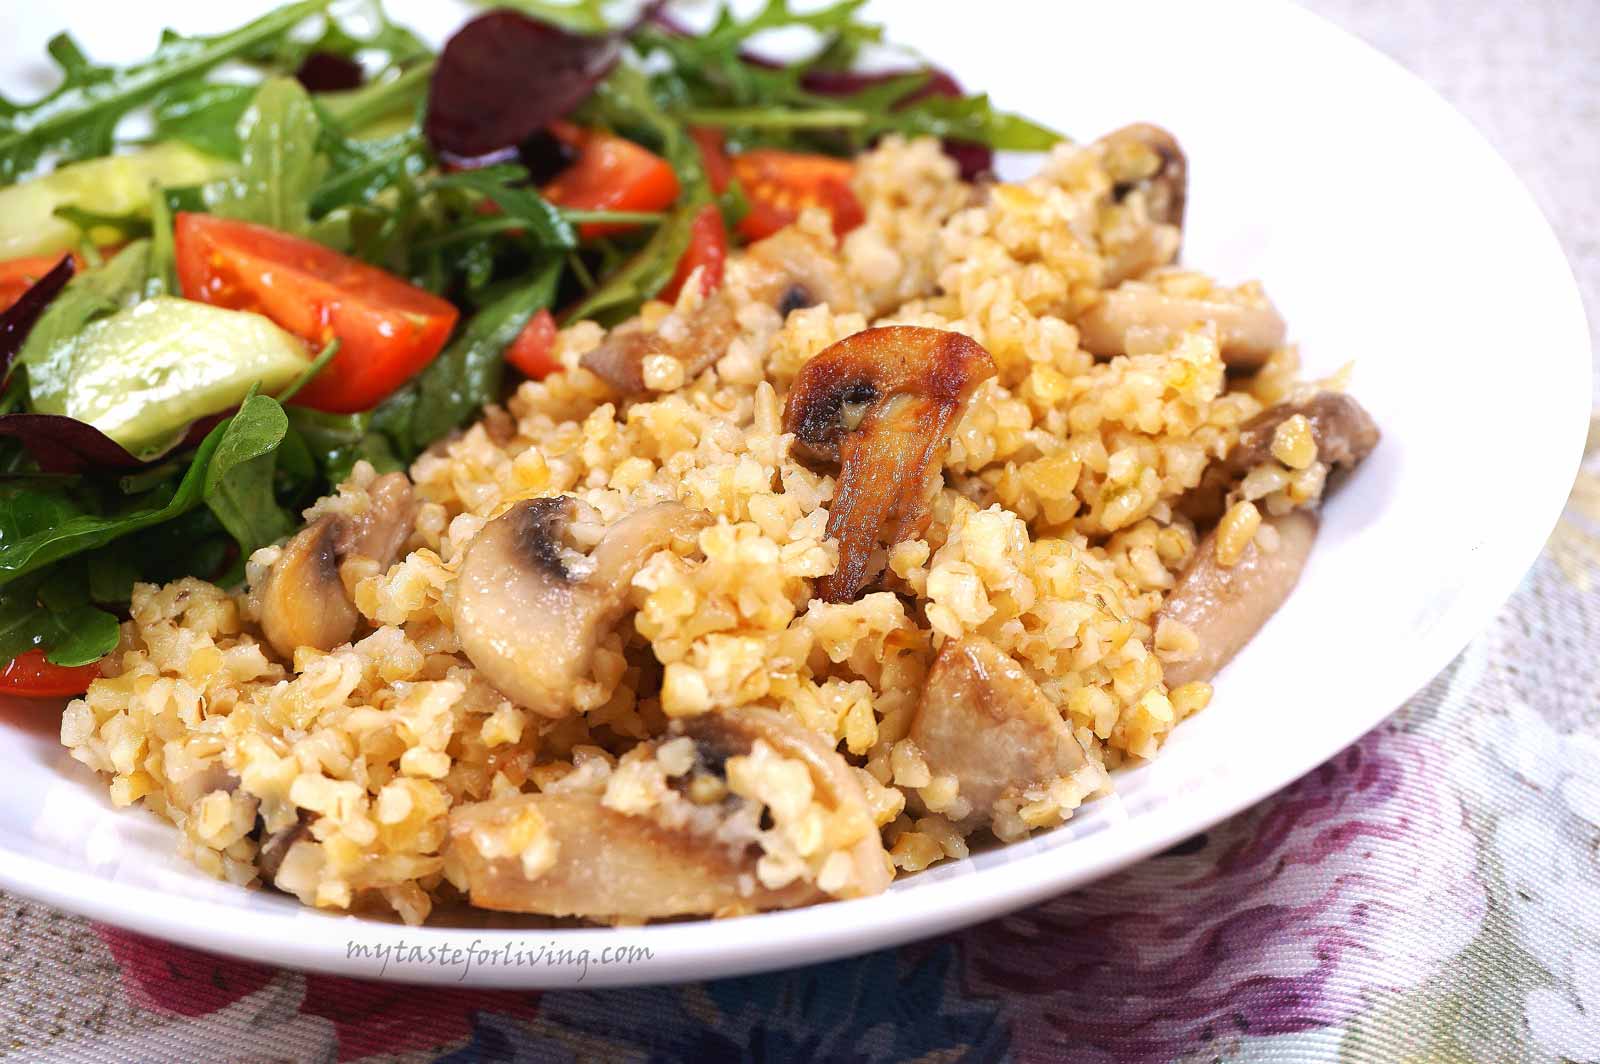 An easy vegan recipe for bulgur with mushrooms and onion. I usually prepare it with yellow onion, but the dish becomes even more fragrant if you use green onions. The amount of mushrooms can vary according to your taste. 